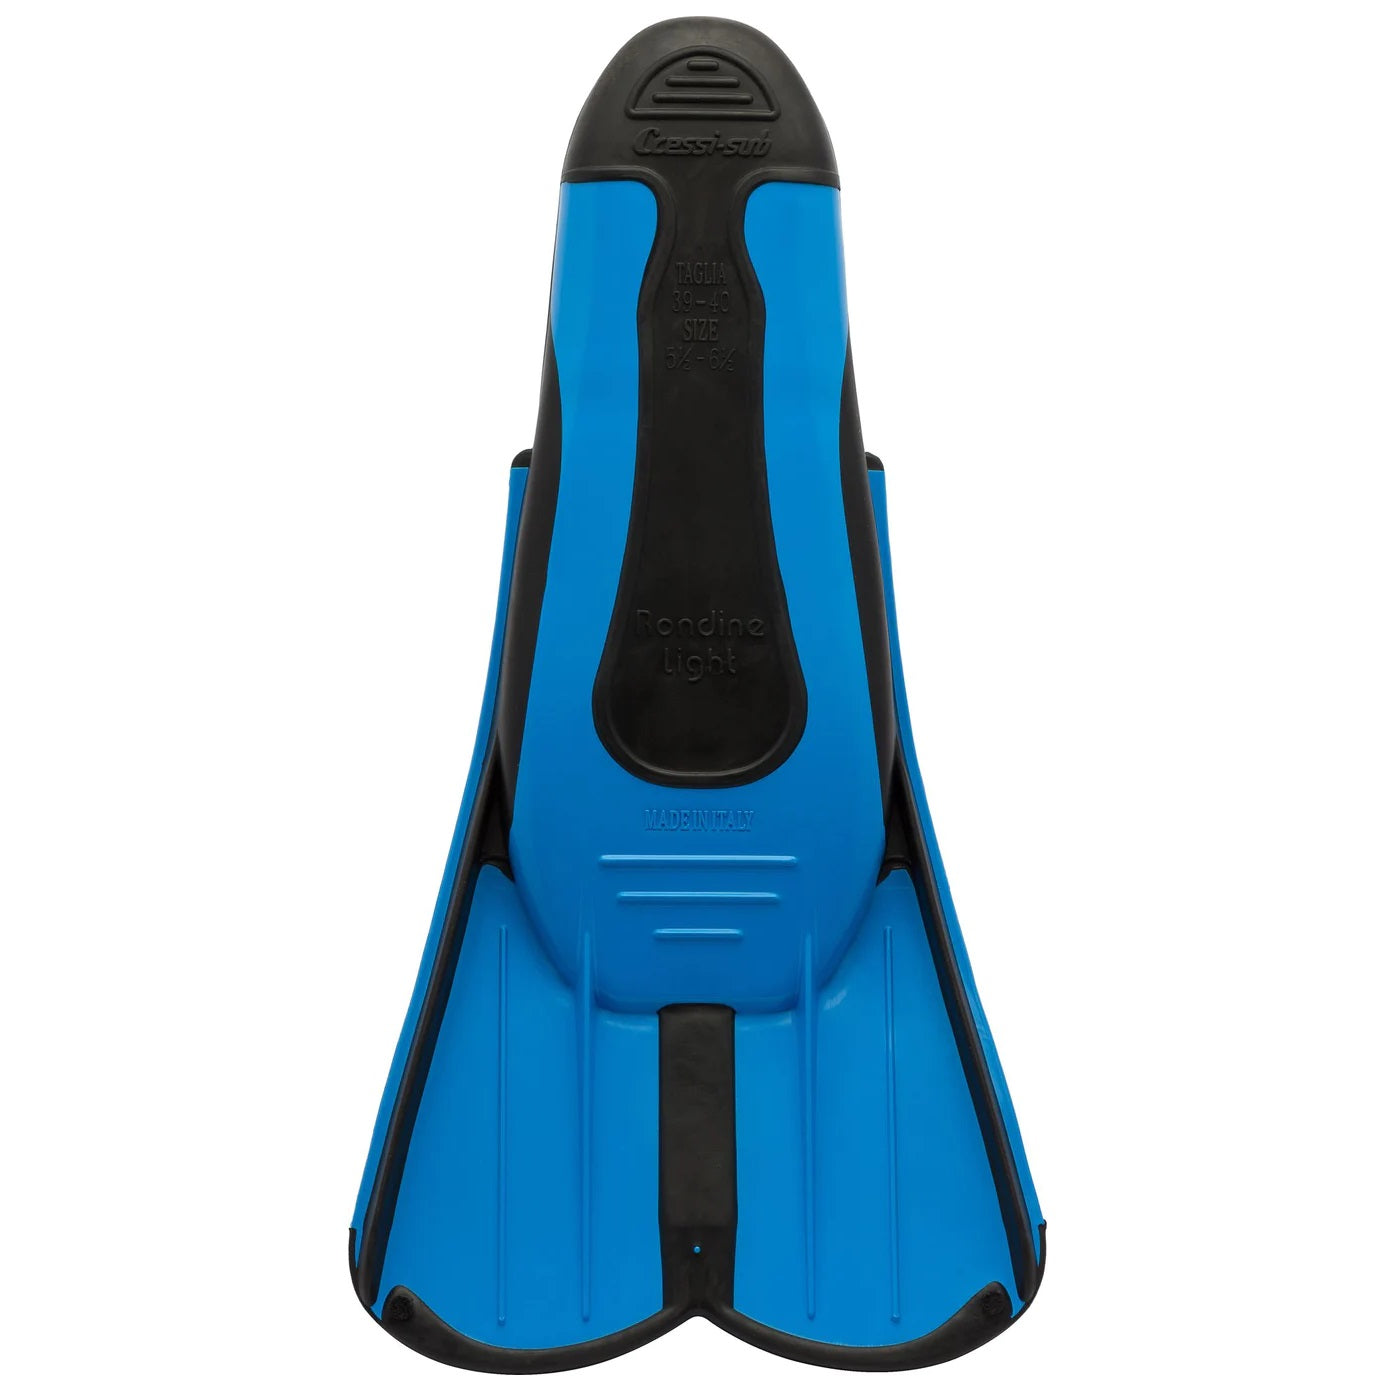 Cressi Light fins are specifically designed for pool use and for swim training,